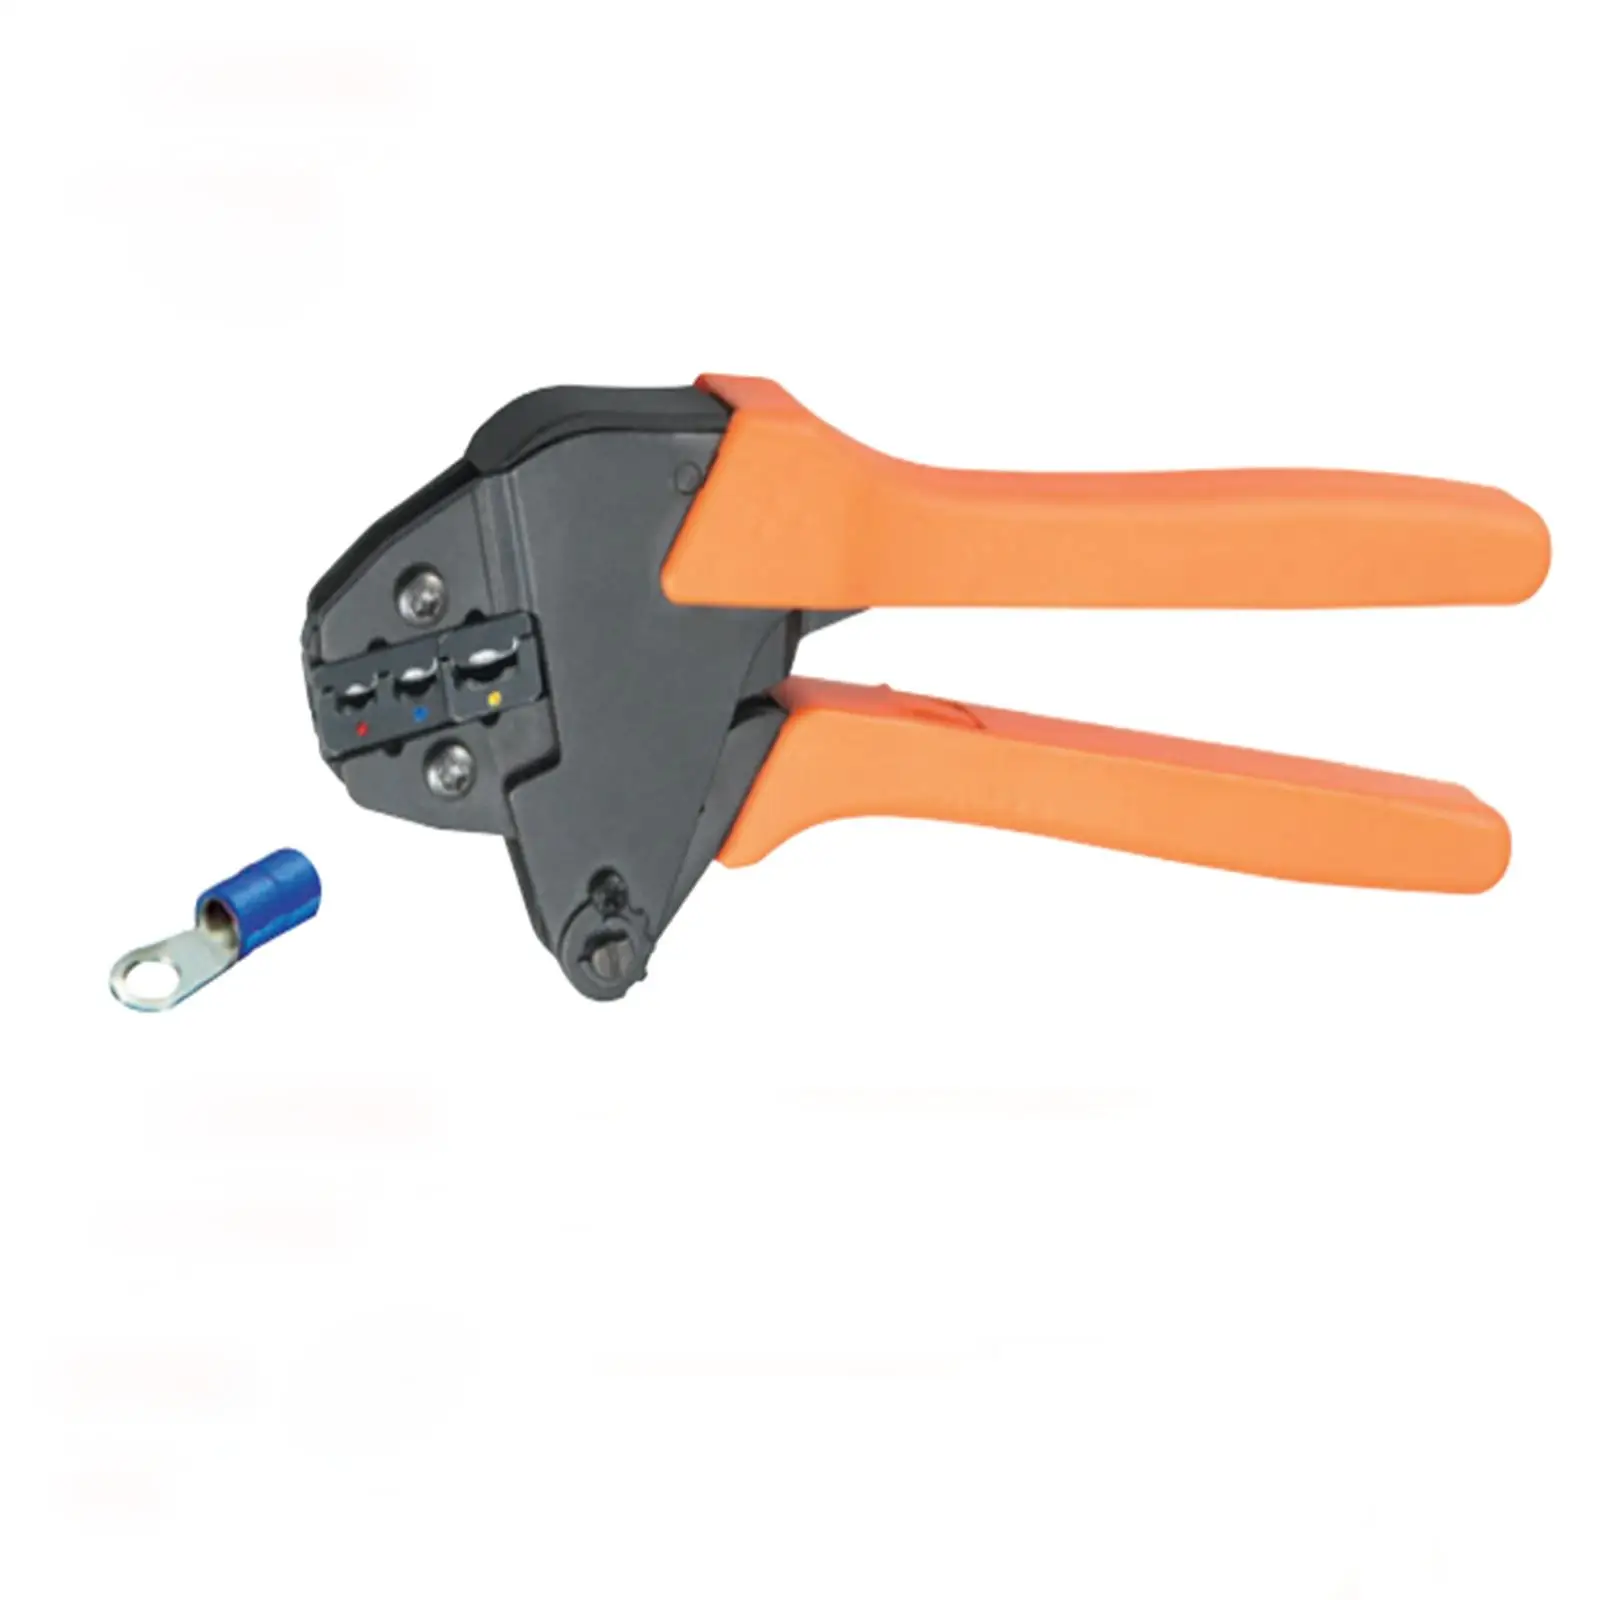 

20-10AWG 0.5-1.5,1.5-2.5,4.0-6.0mm² Insulated Terminals Ratchet Crimping Plier